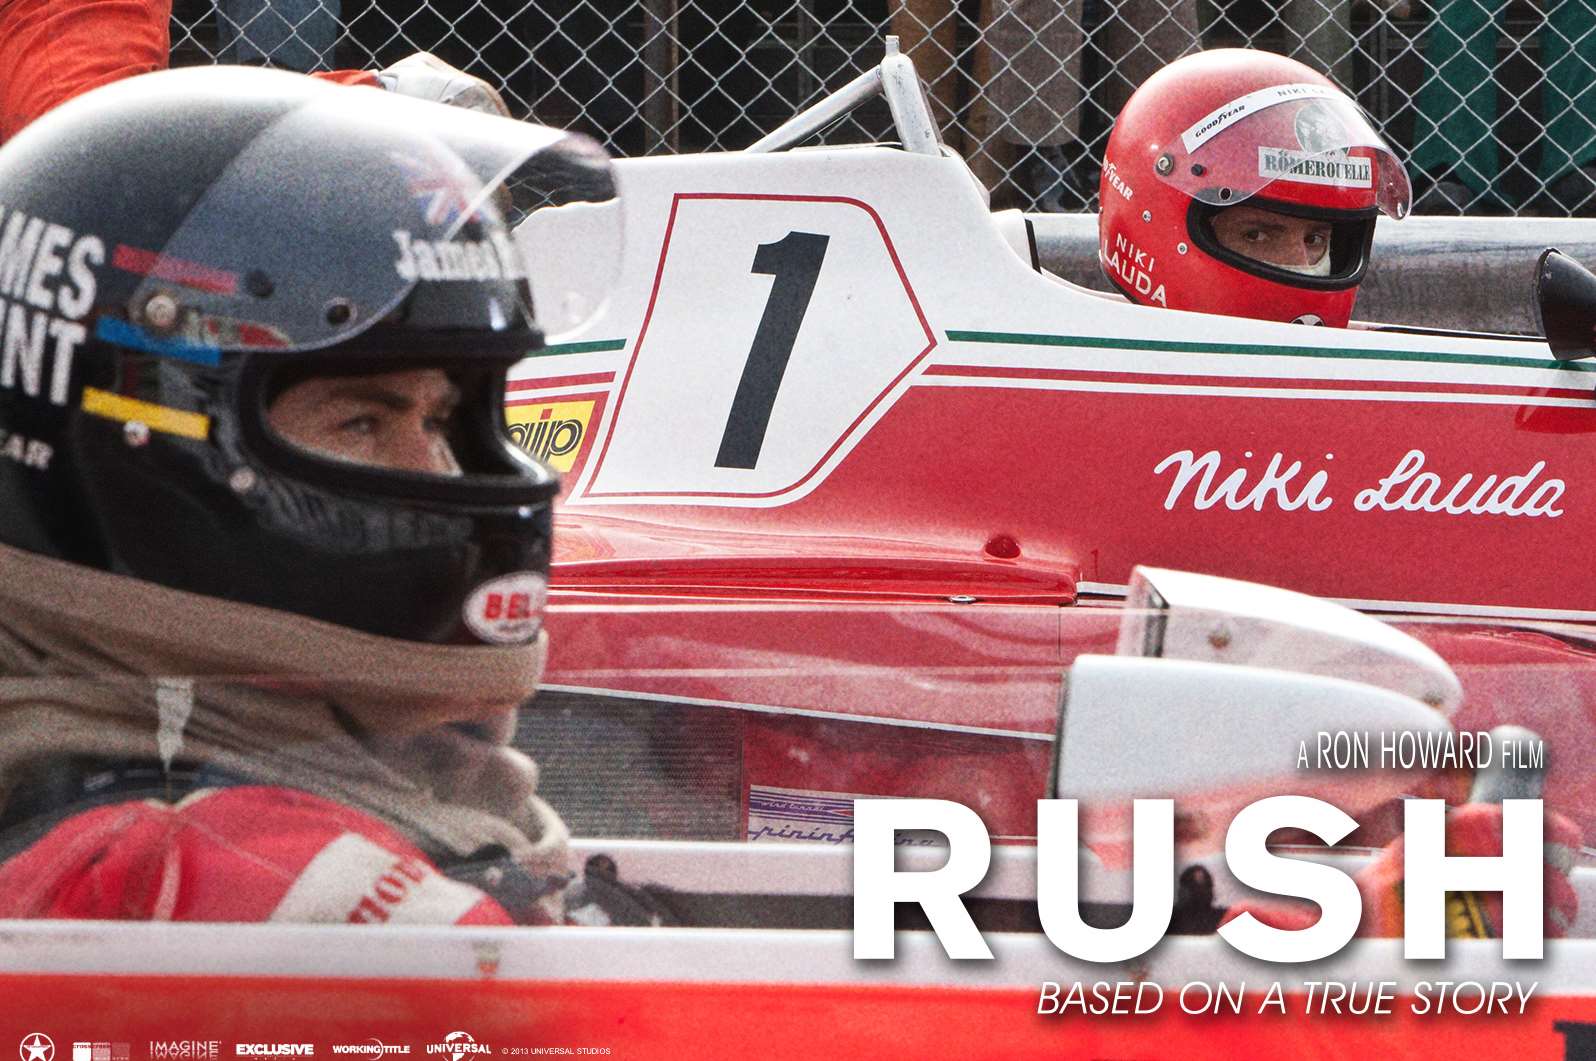 The poster for the movie Rush